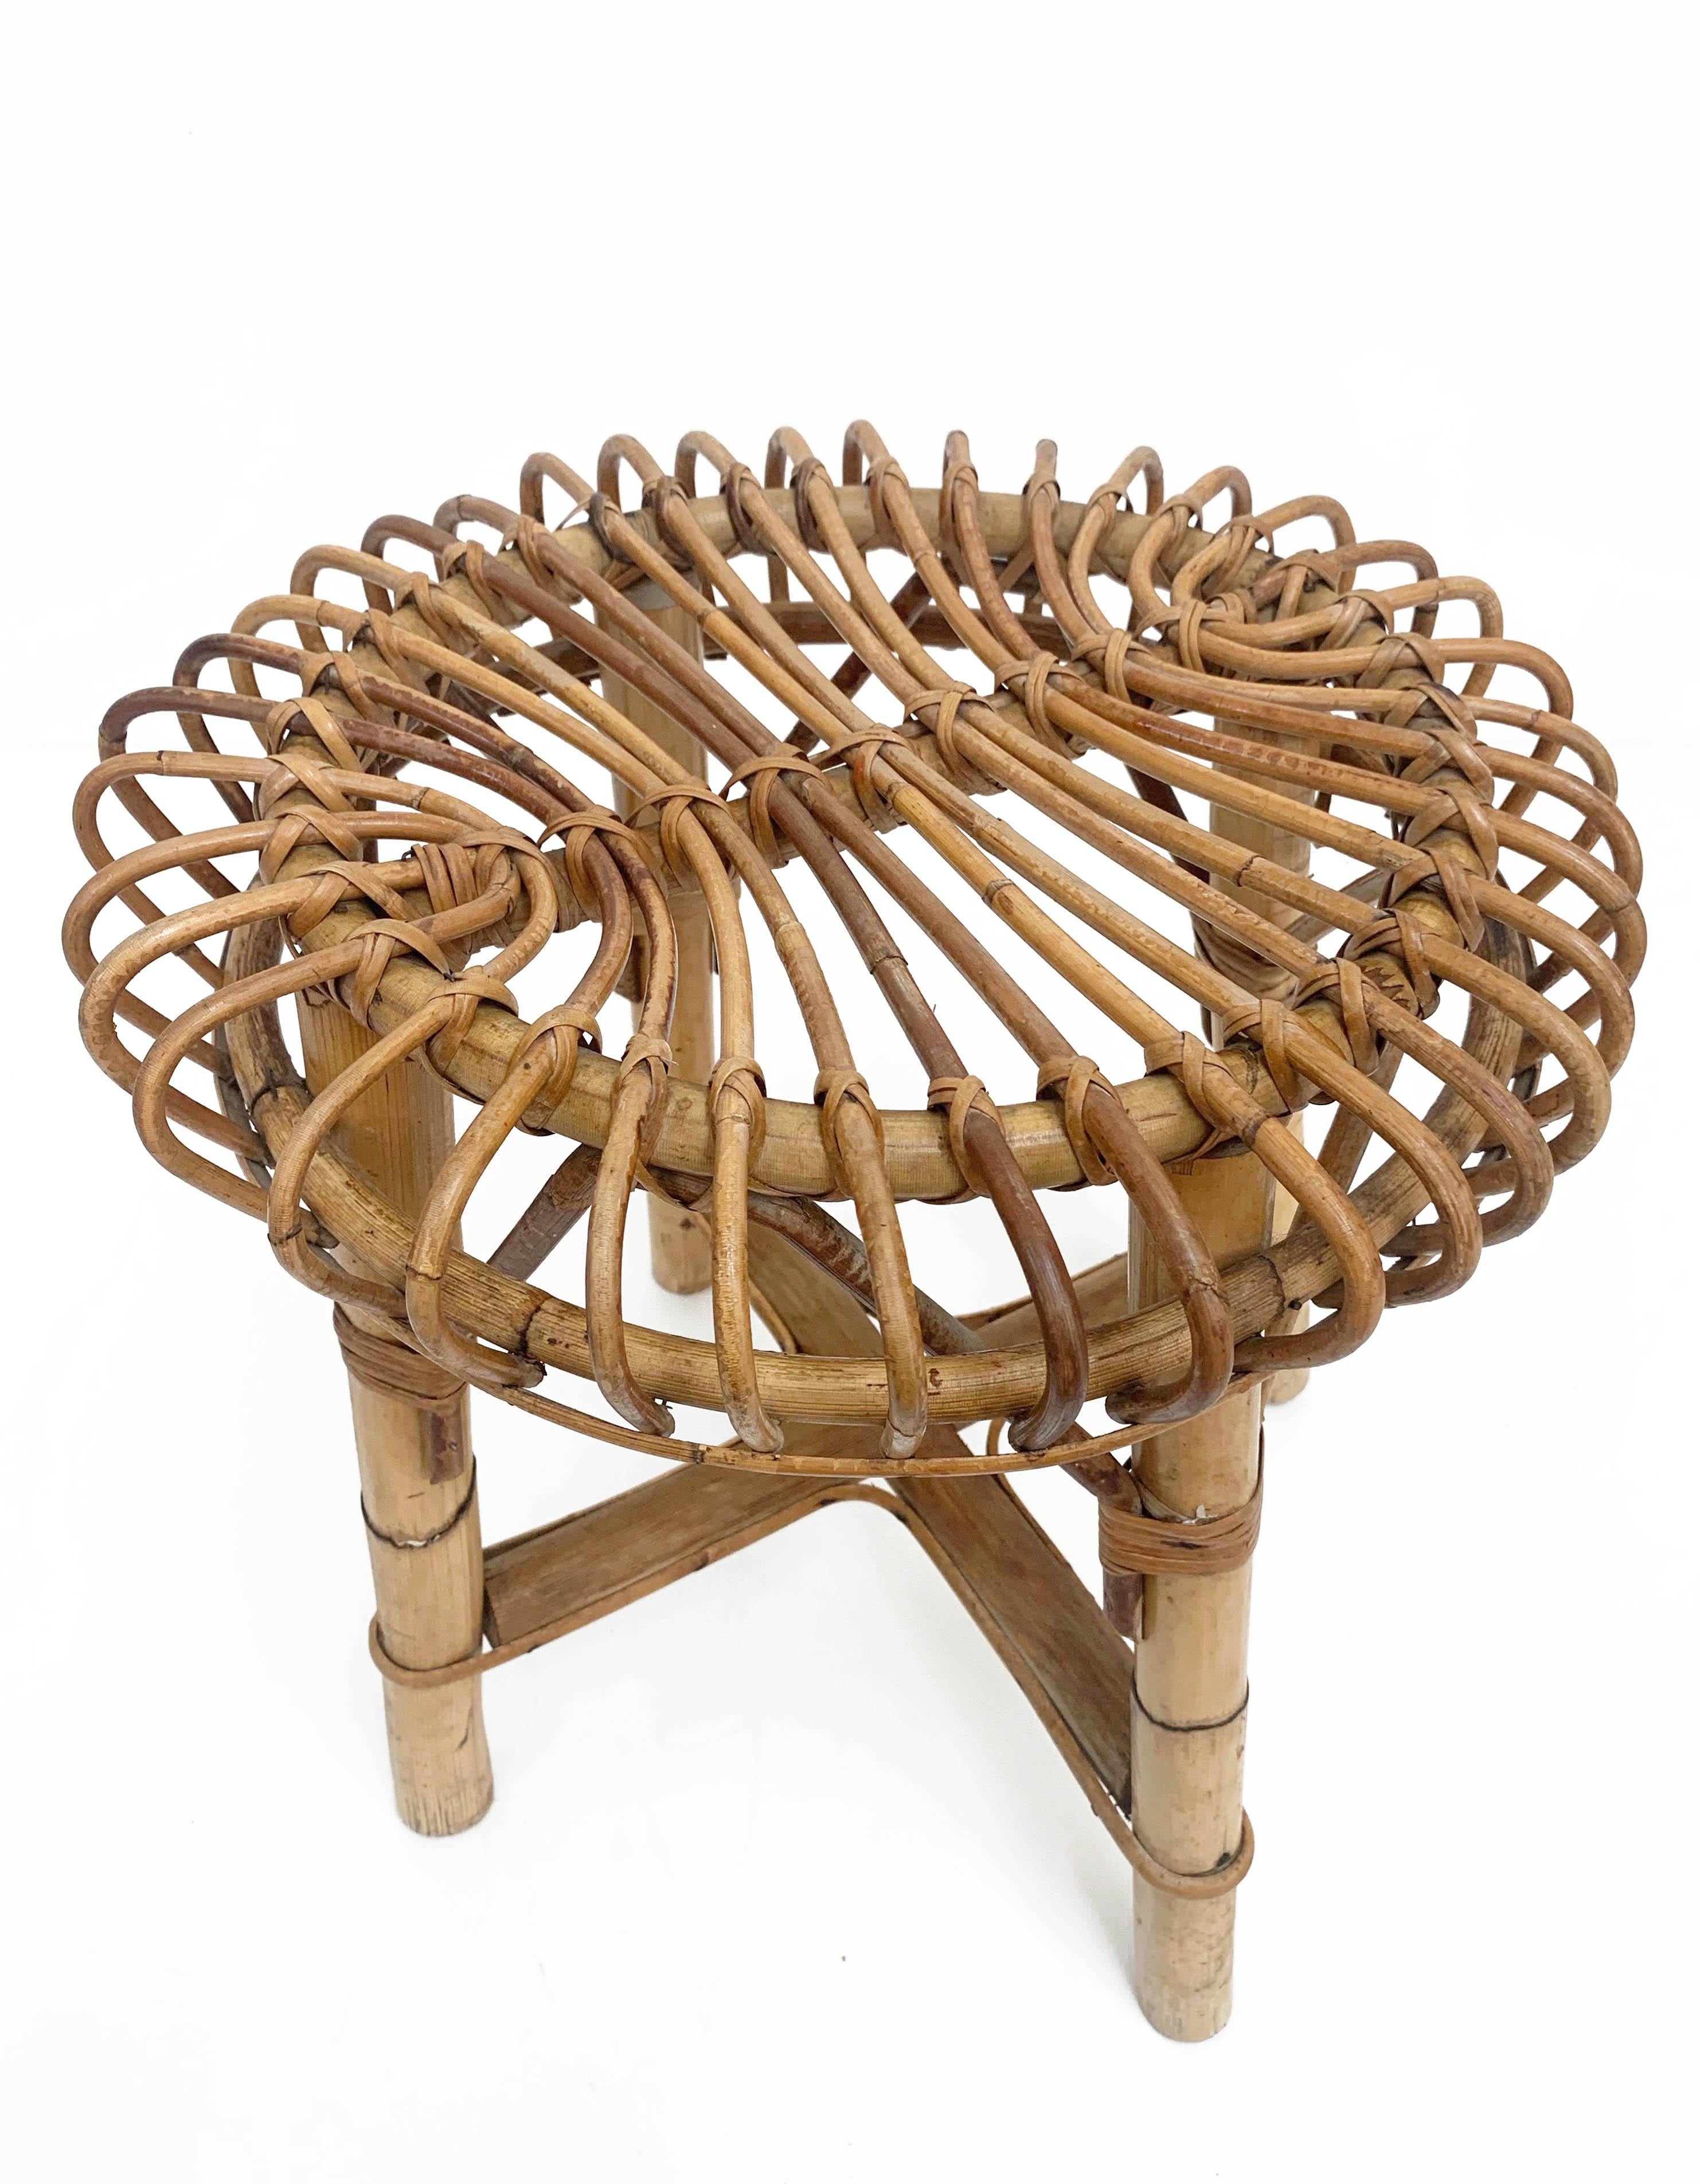 Midcentury rattan and bamboo stool. This stool was designed in Italy during the 1960s.

The extraordinary architectural ideas emerge in their purity and poetry of form, decorating the solid and strong bamboo structure.

This item is very well